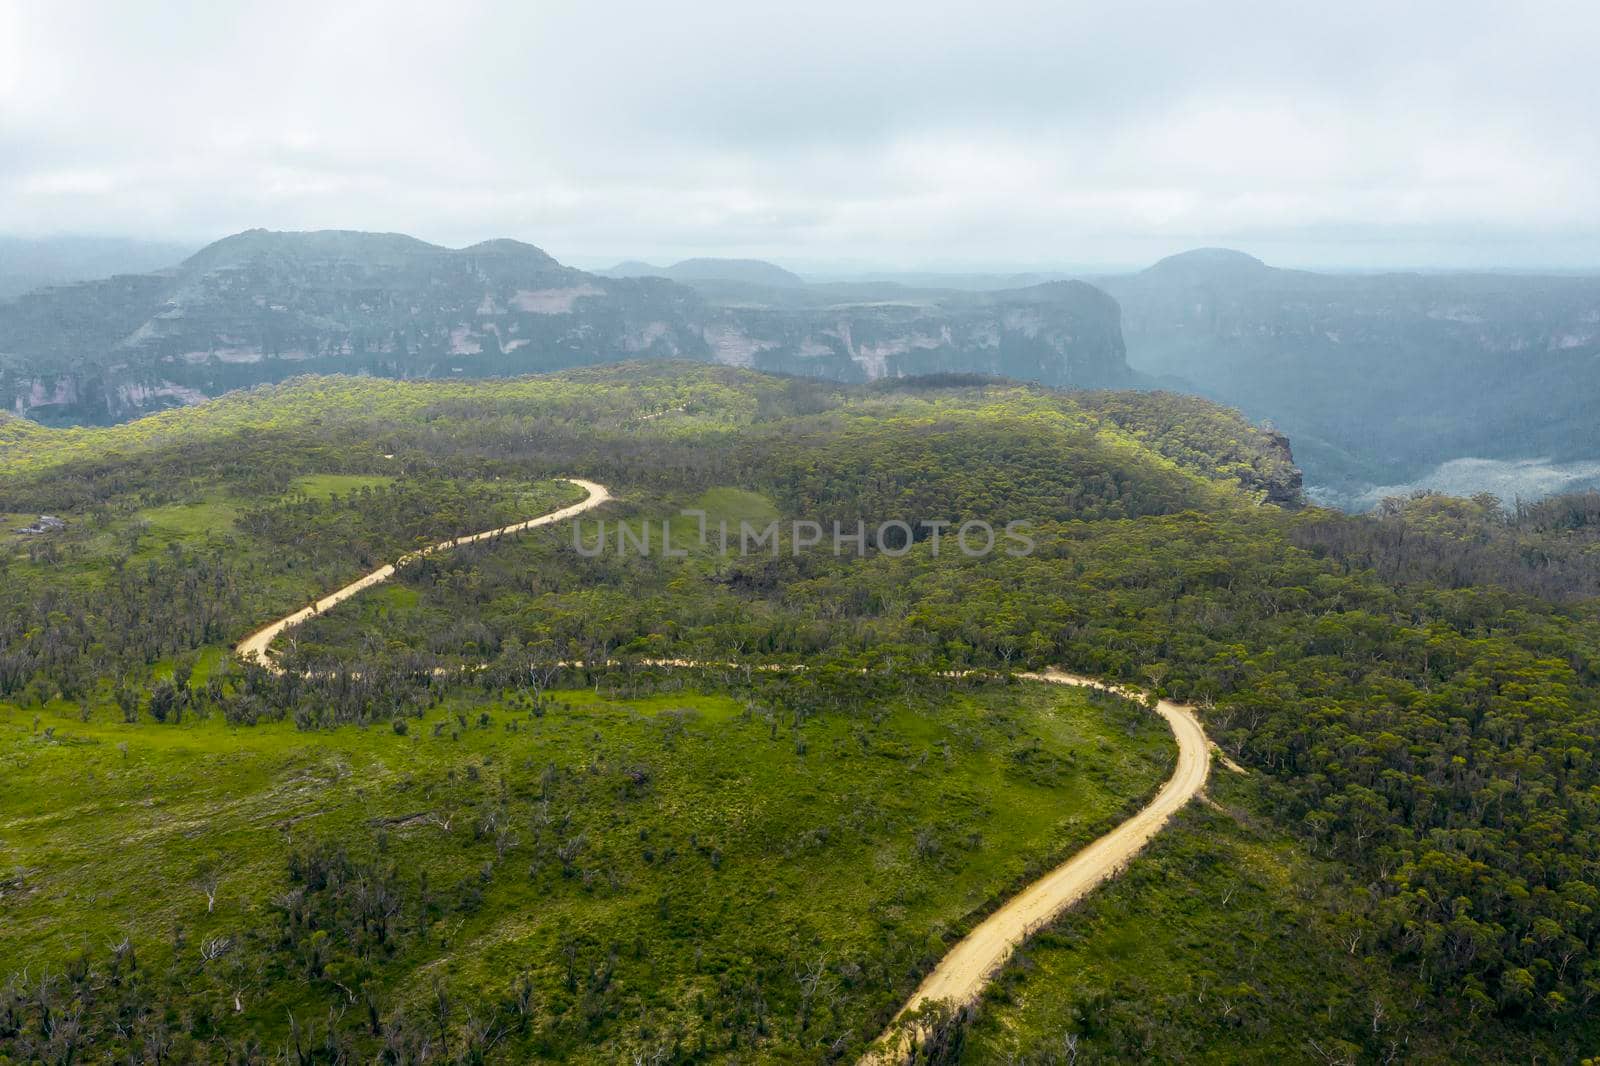 Aerial view of a dirt track in the Grose Valley in The Blue Mountains in Australia by WittkePhotos